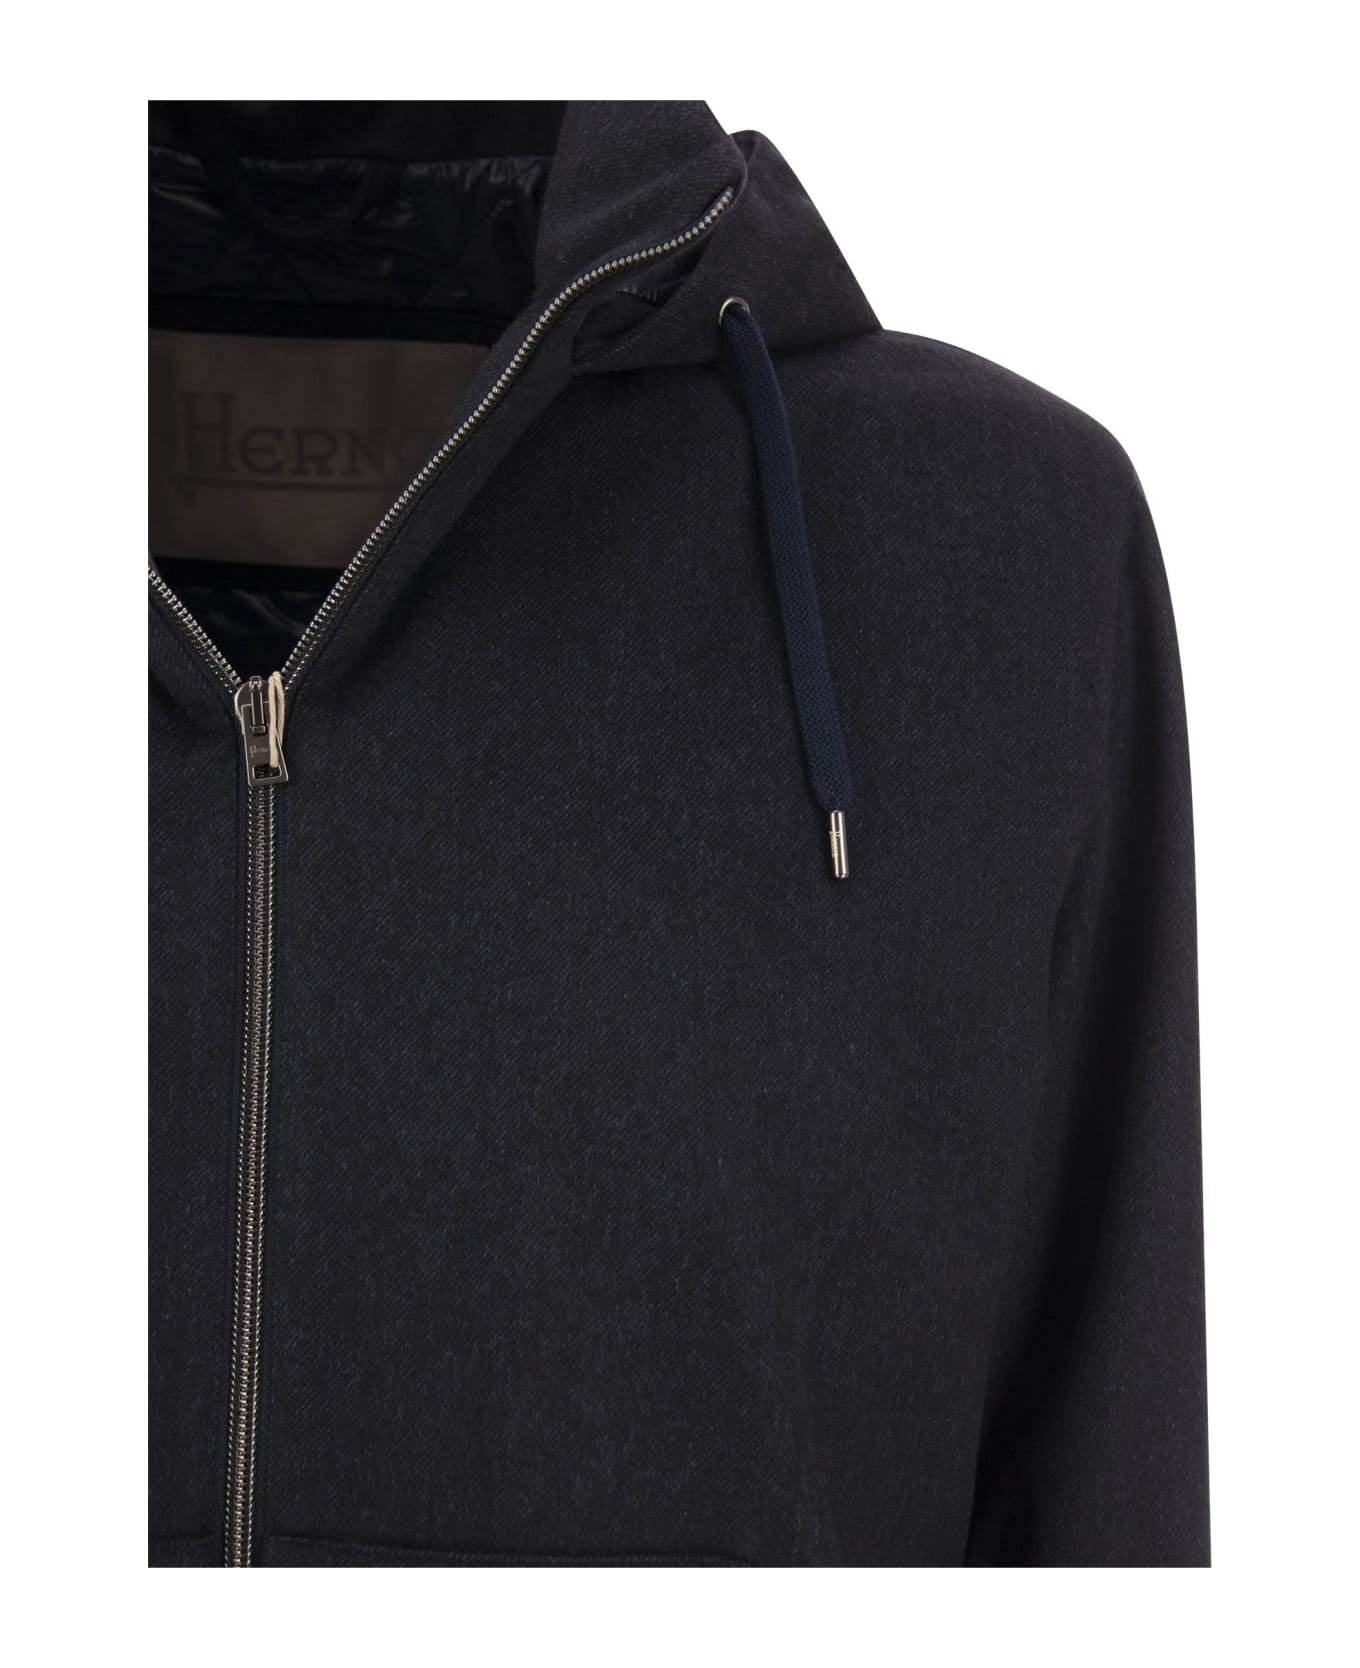 Herno Cashmere And Silk Hooded Jacket - Blue